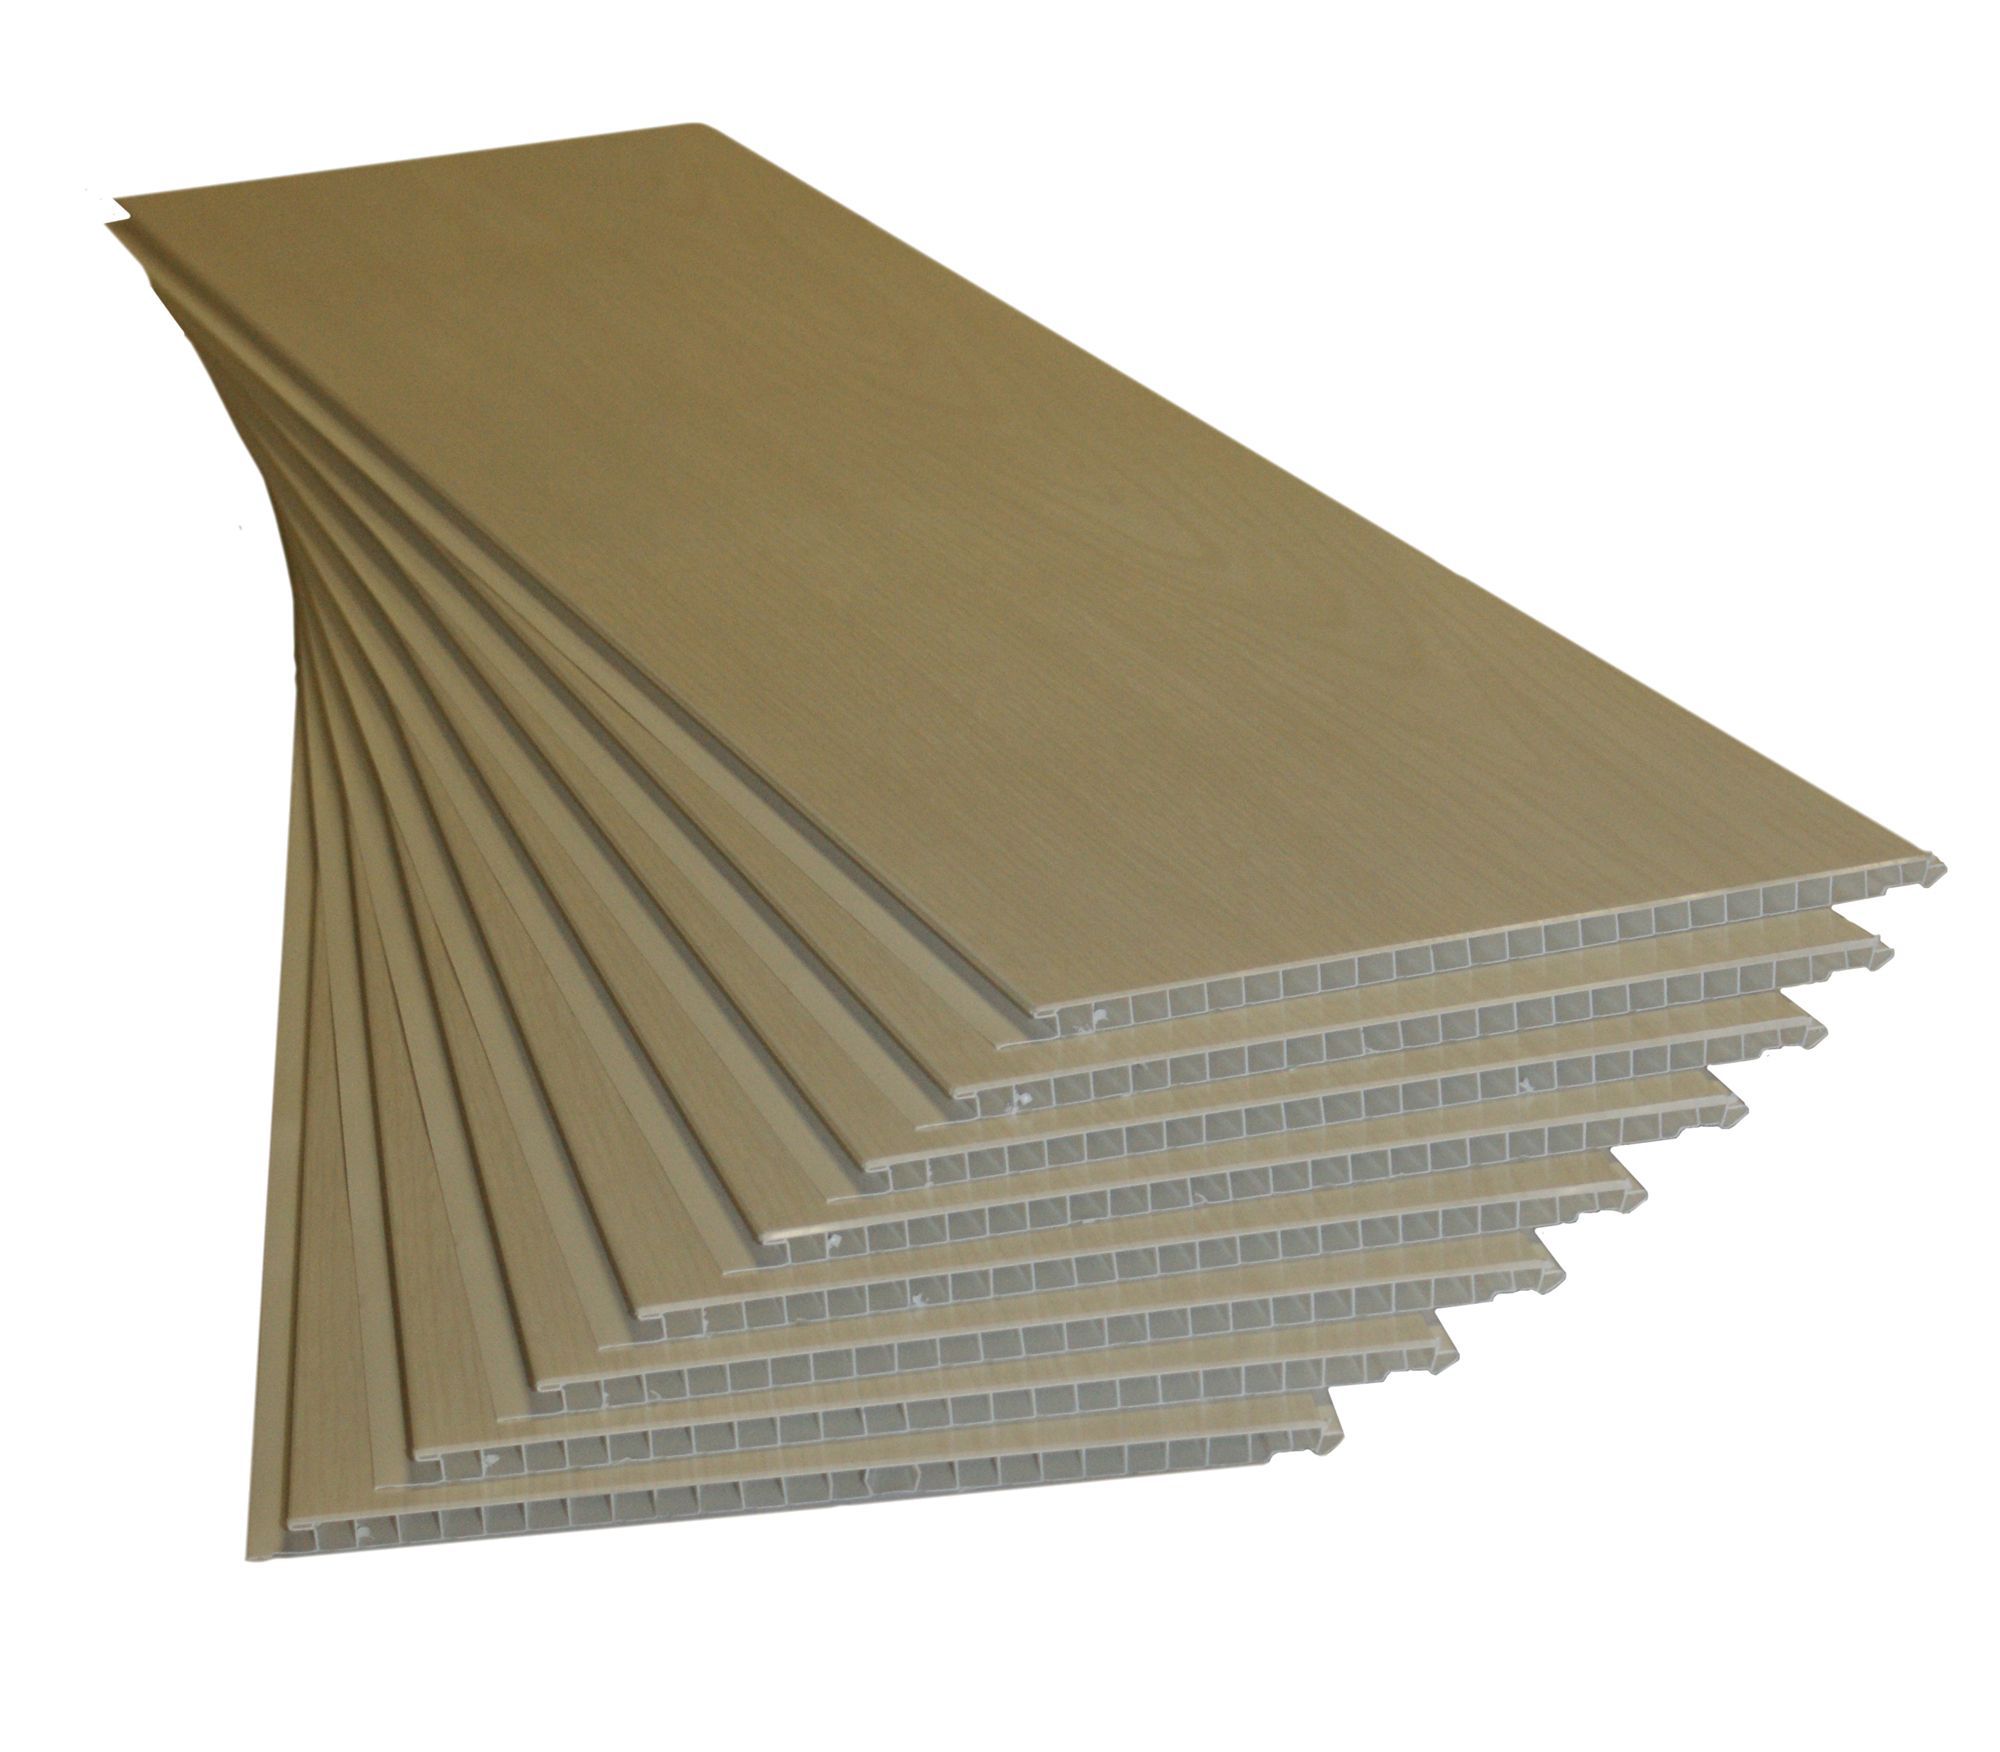 White Polyvinyl chloride (PVC) Cladding (L)1.2m (W)250mm (T)10mm, Pack of 8